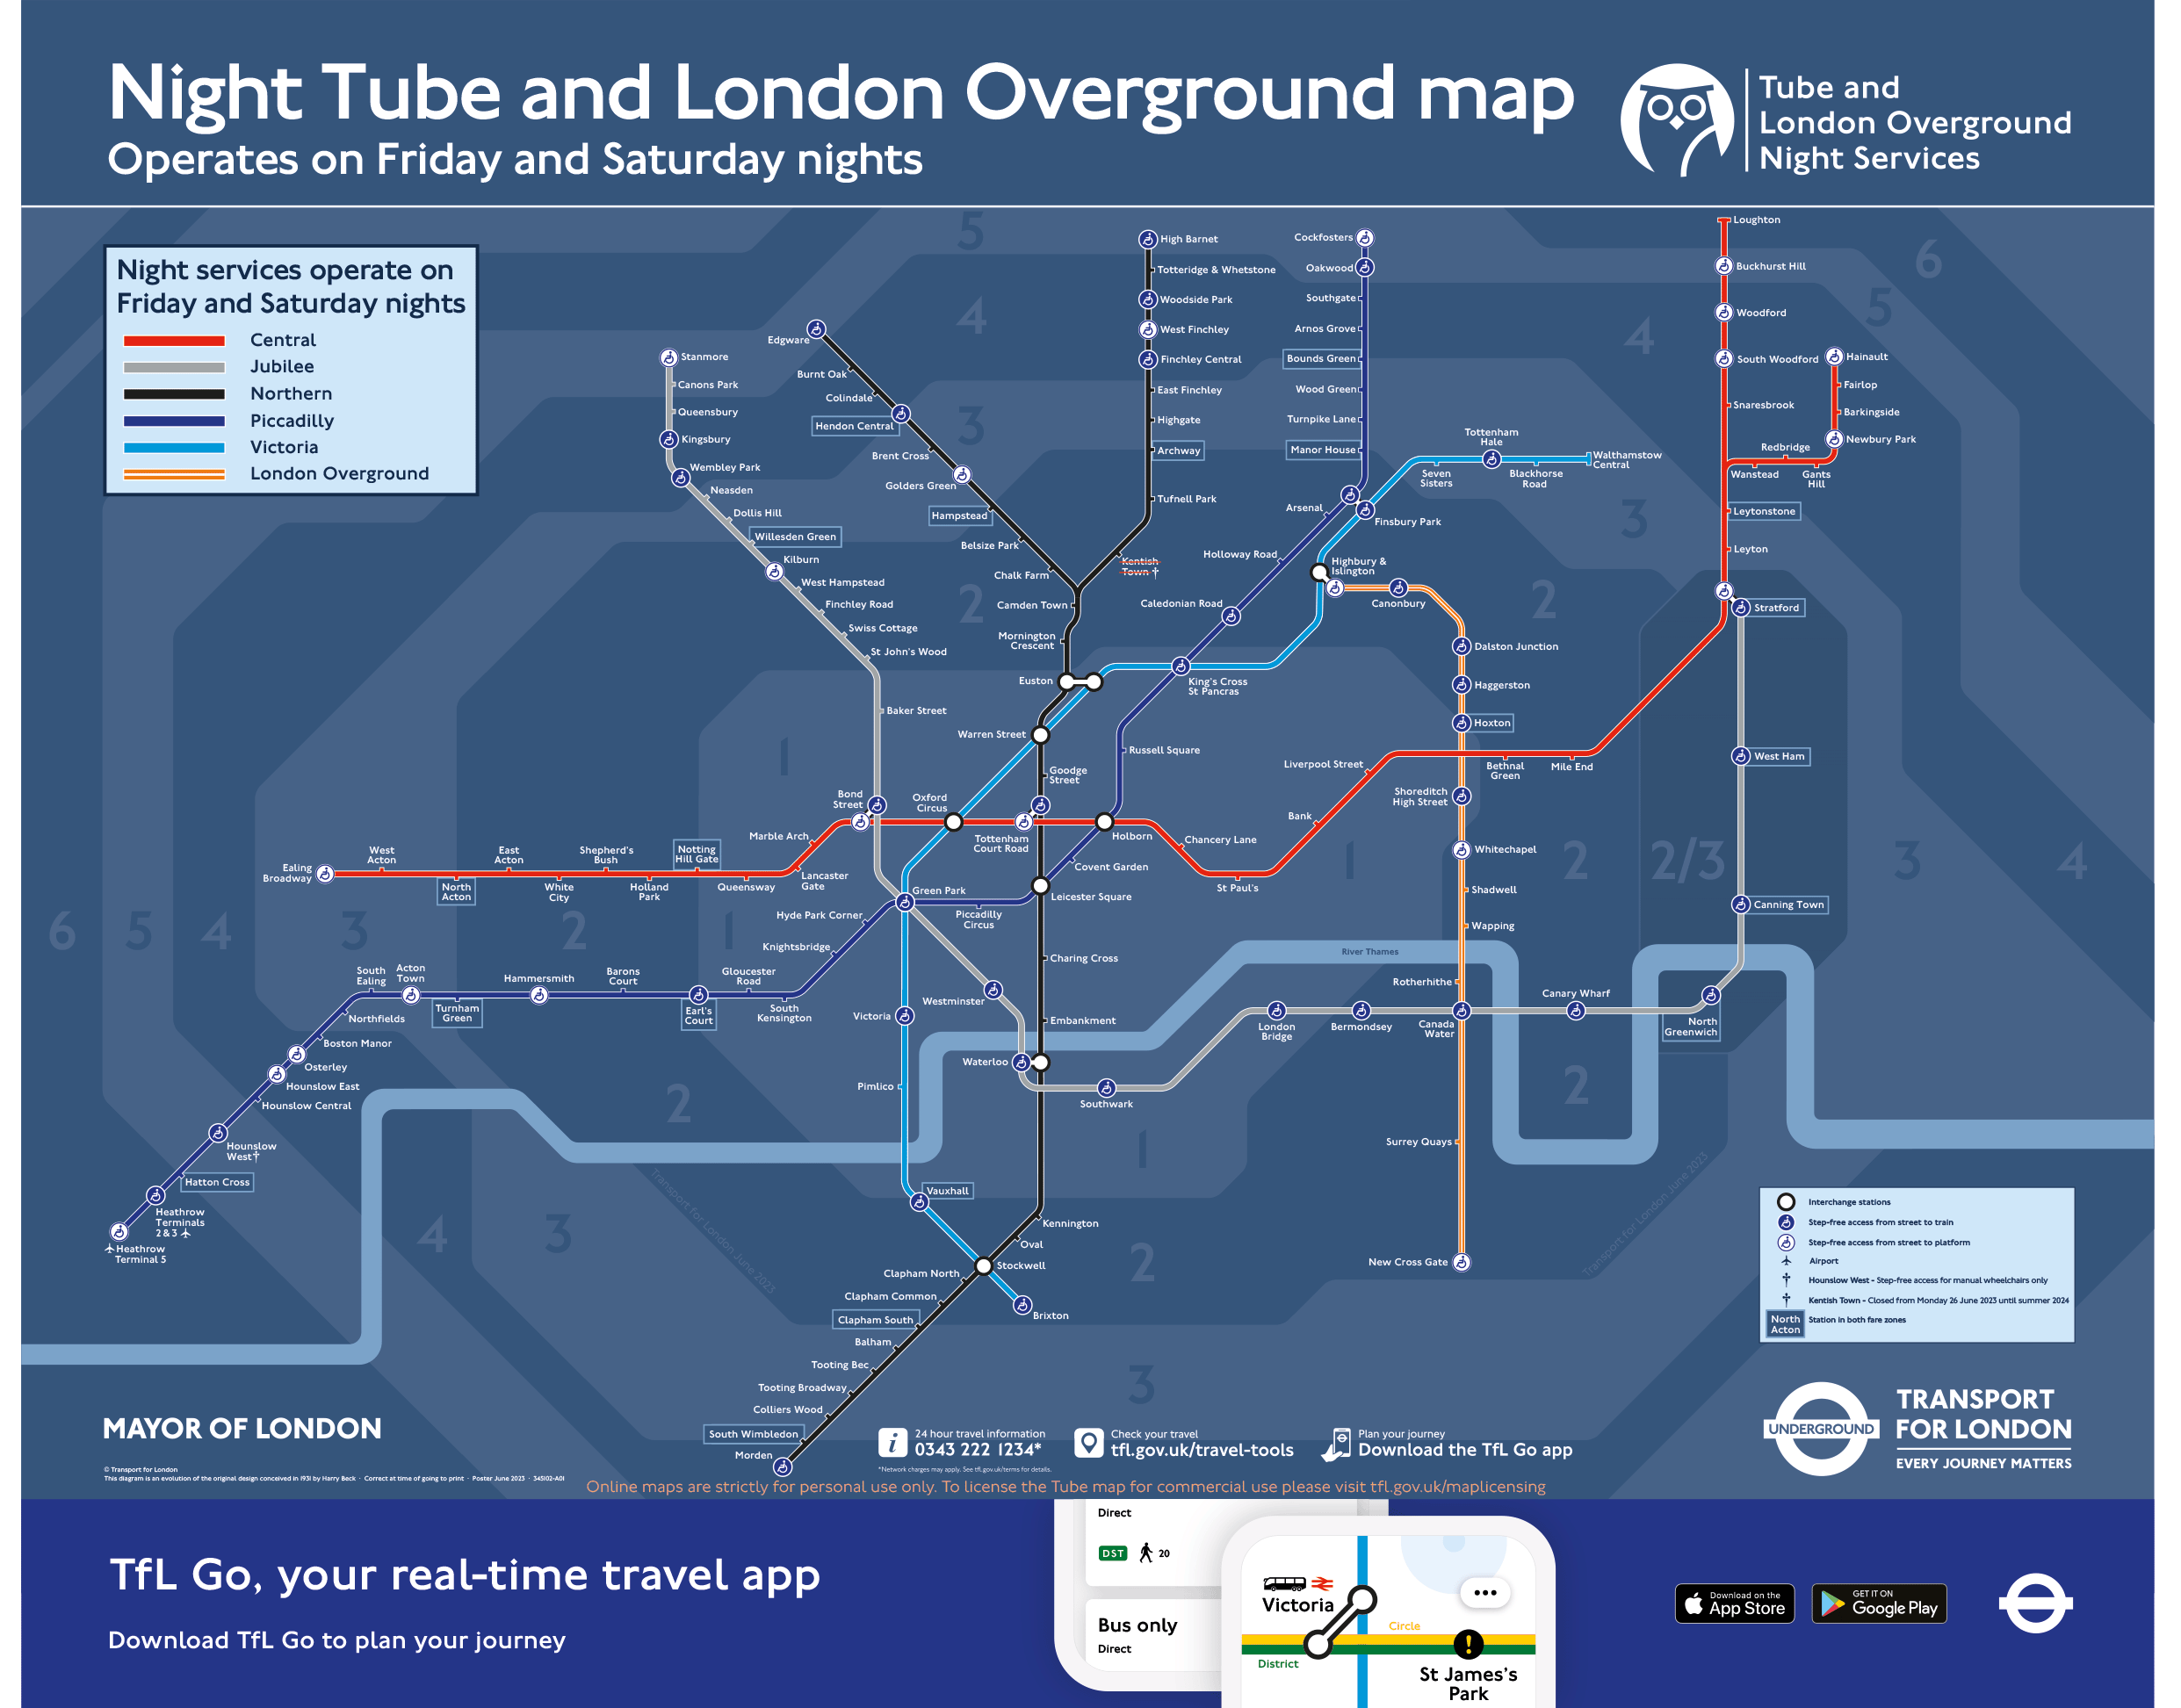 Is the tube still 24 hours?